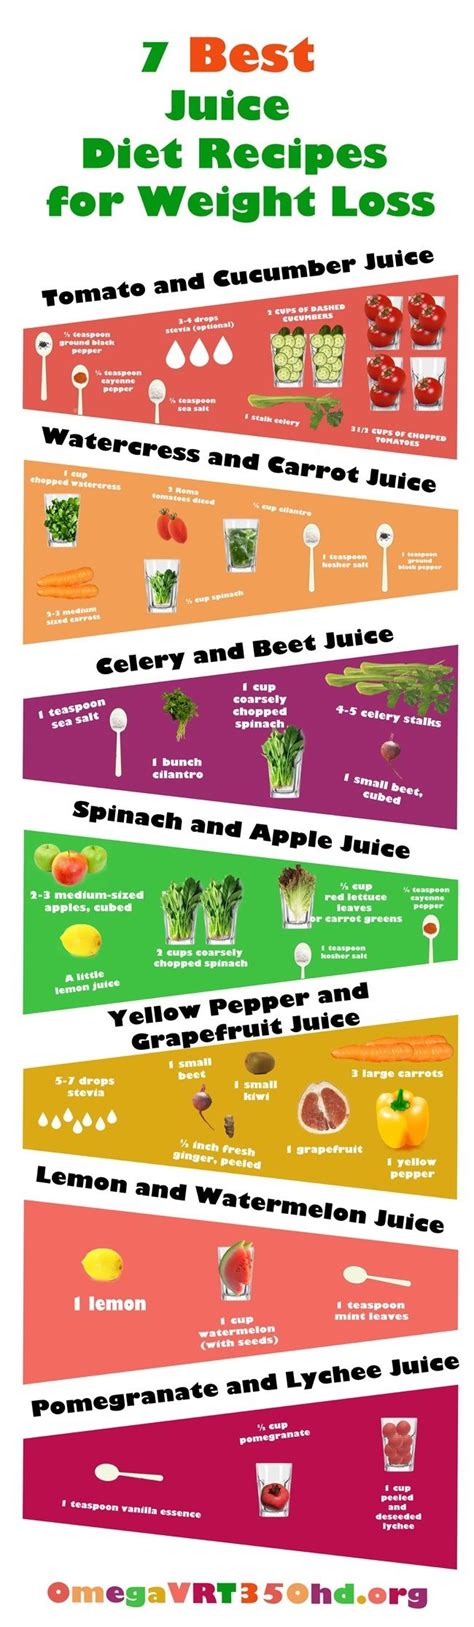 If you're considering trying out a juice cleanse, juice fasting or some juice recipes for weight loss, these 5 best juicer recipes for weight loss can help you quickly. 7 Best Juice Diet Recipes For Weight Loss Pictures, Photos ...